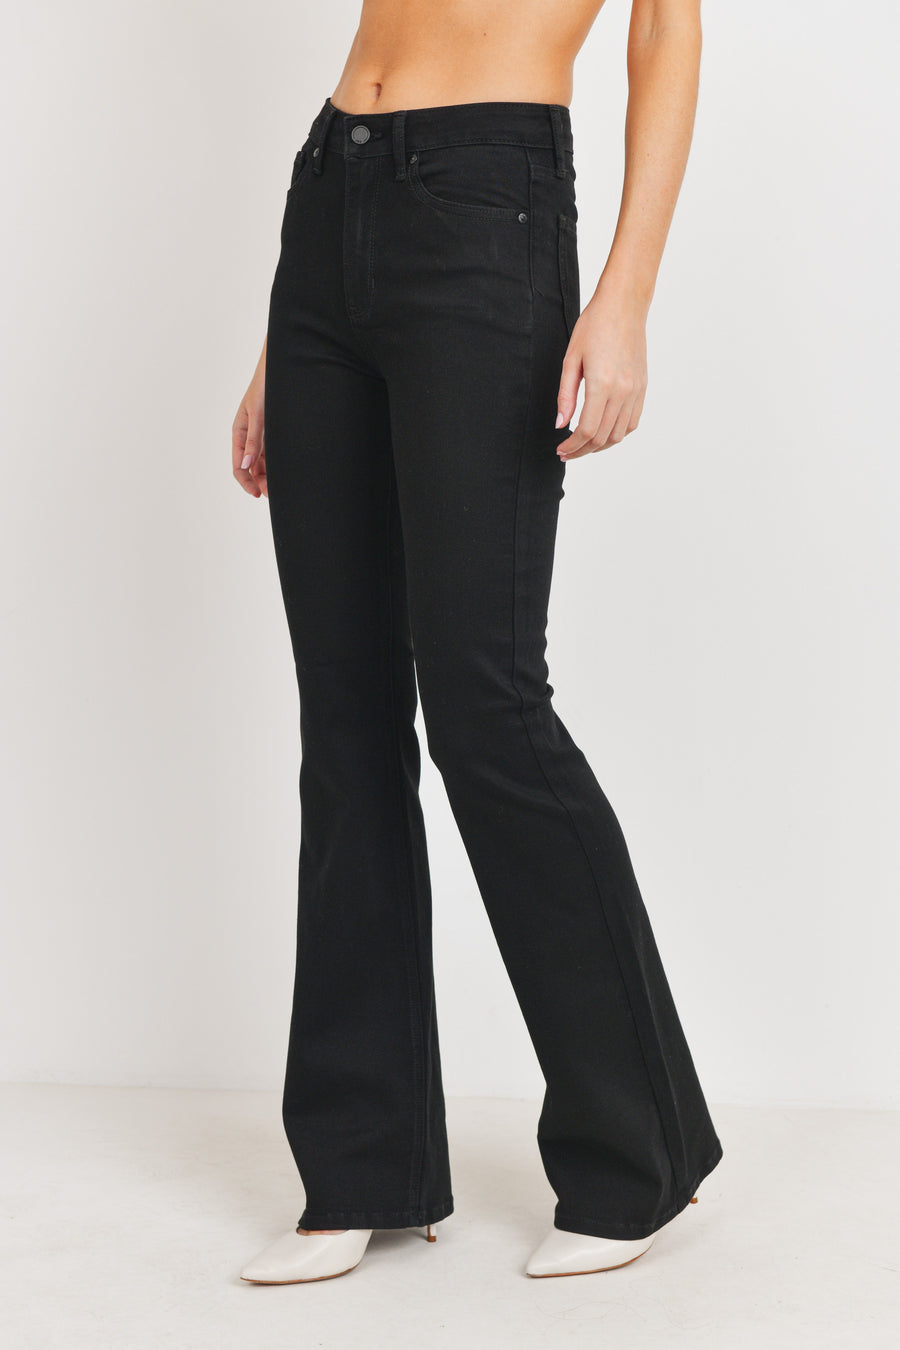 Long denim black jeans with a button and zipper in the front for closure.